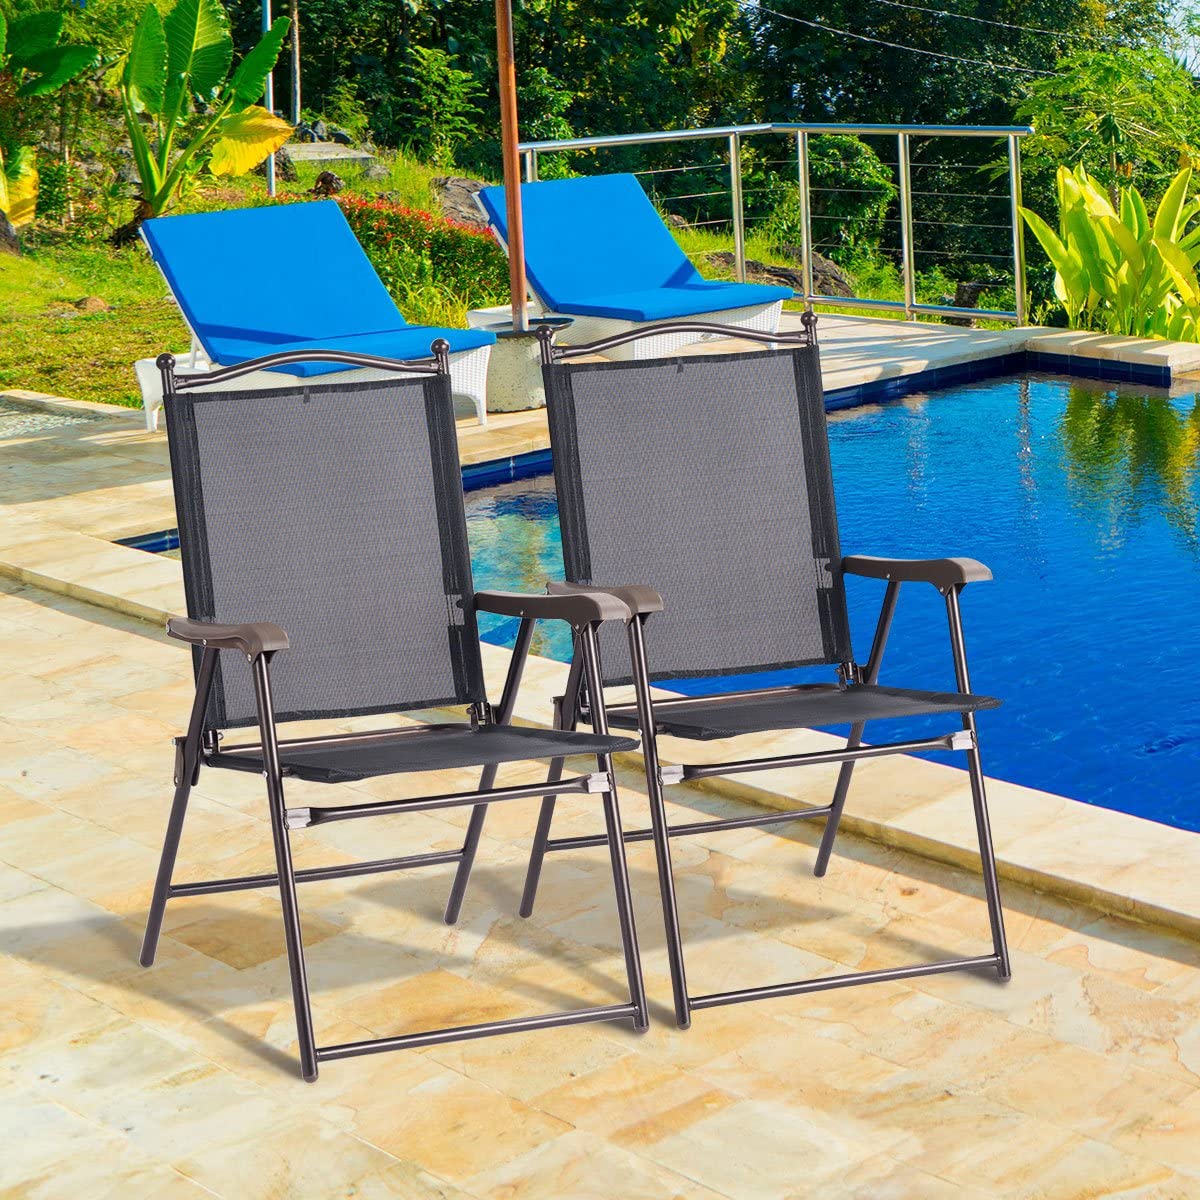 Set of 2 Patio Folding Chairs, Sling Chairs, Indoor Outdoor Lawn Chairs, Camping Garden Pool Beach Yard Lounge Chairs w/Armrest, Patio Dining Chairs, Metal Frame No Assembly, Black - image 3 of 9